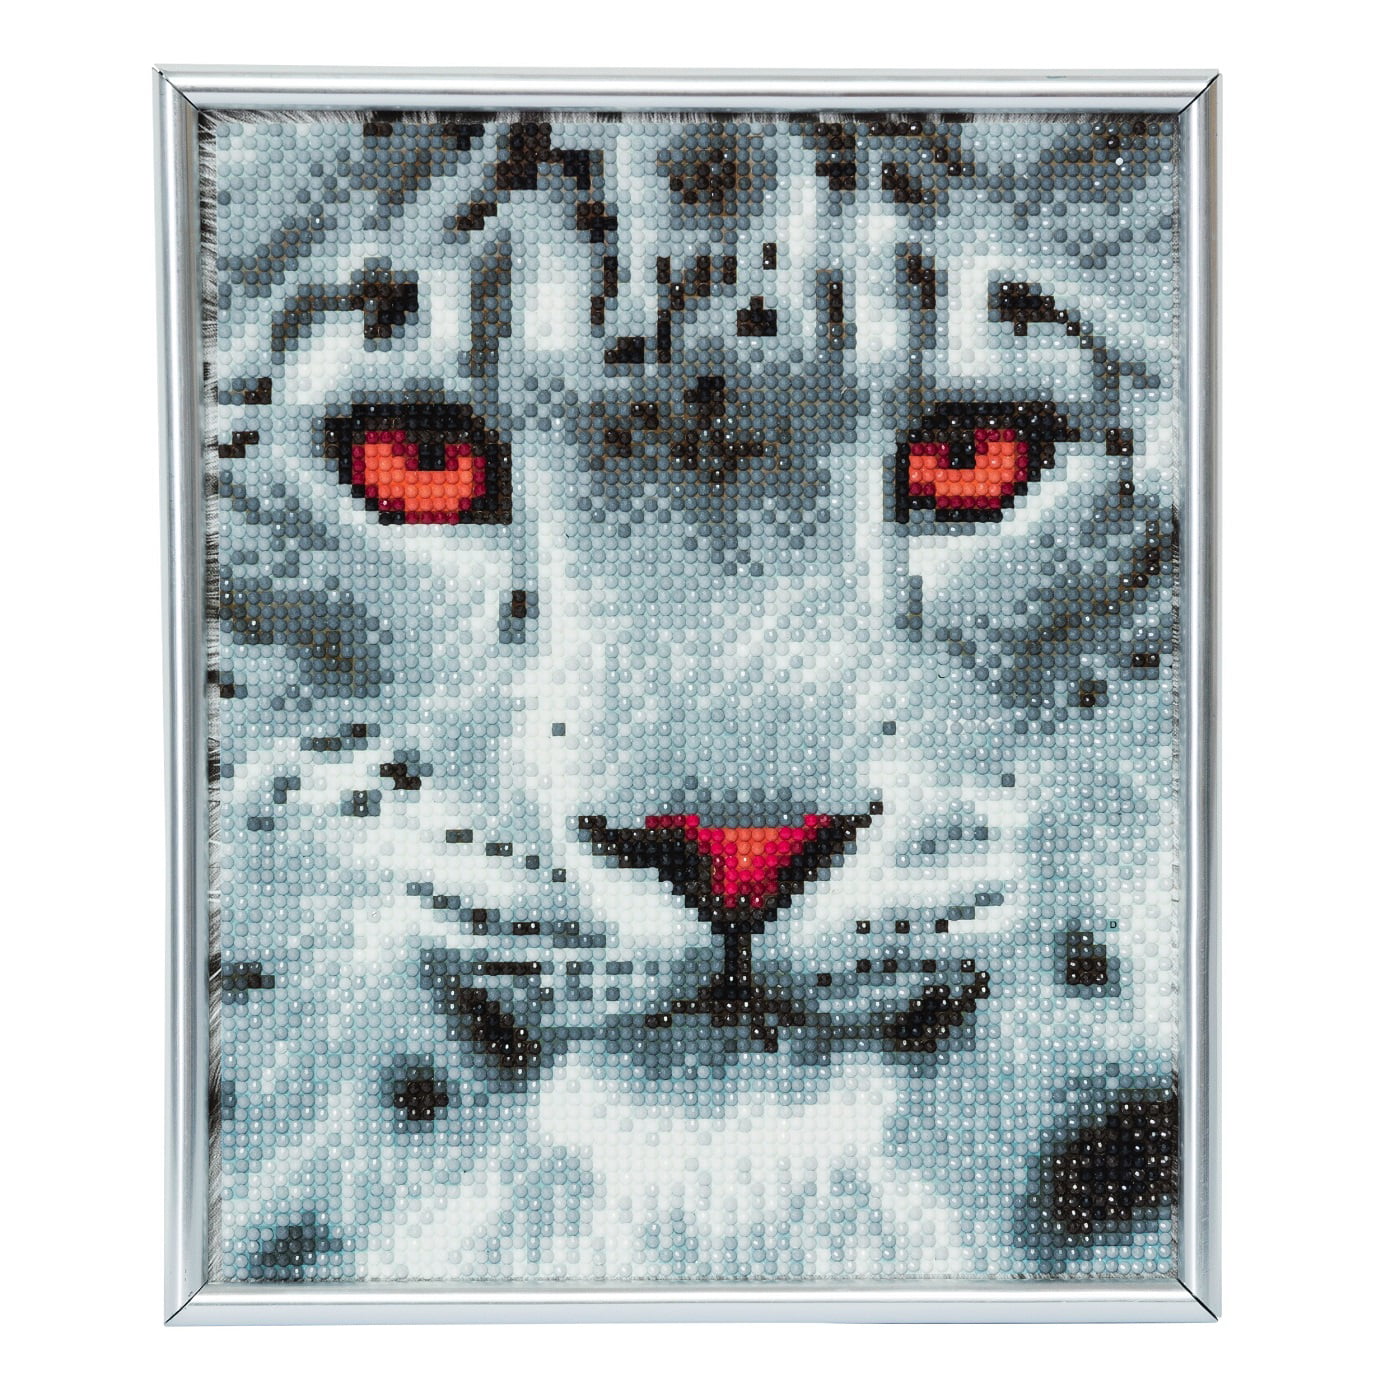 Crystal Art Diamond Painting Card Kit - Tiger- Create Your Own 7x7 Card  Kit - for Ages 8 and up